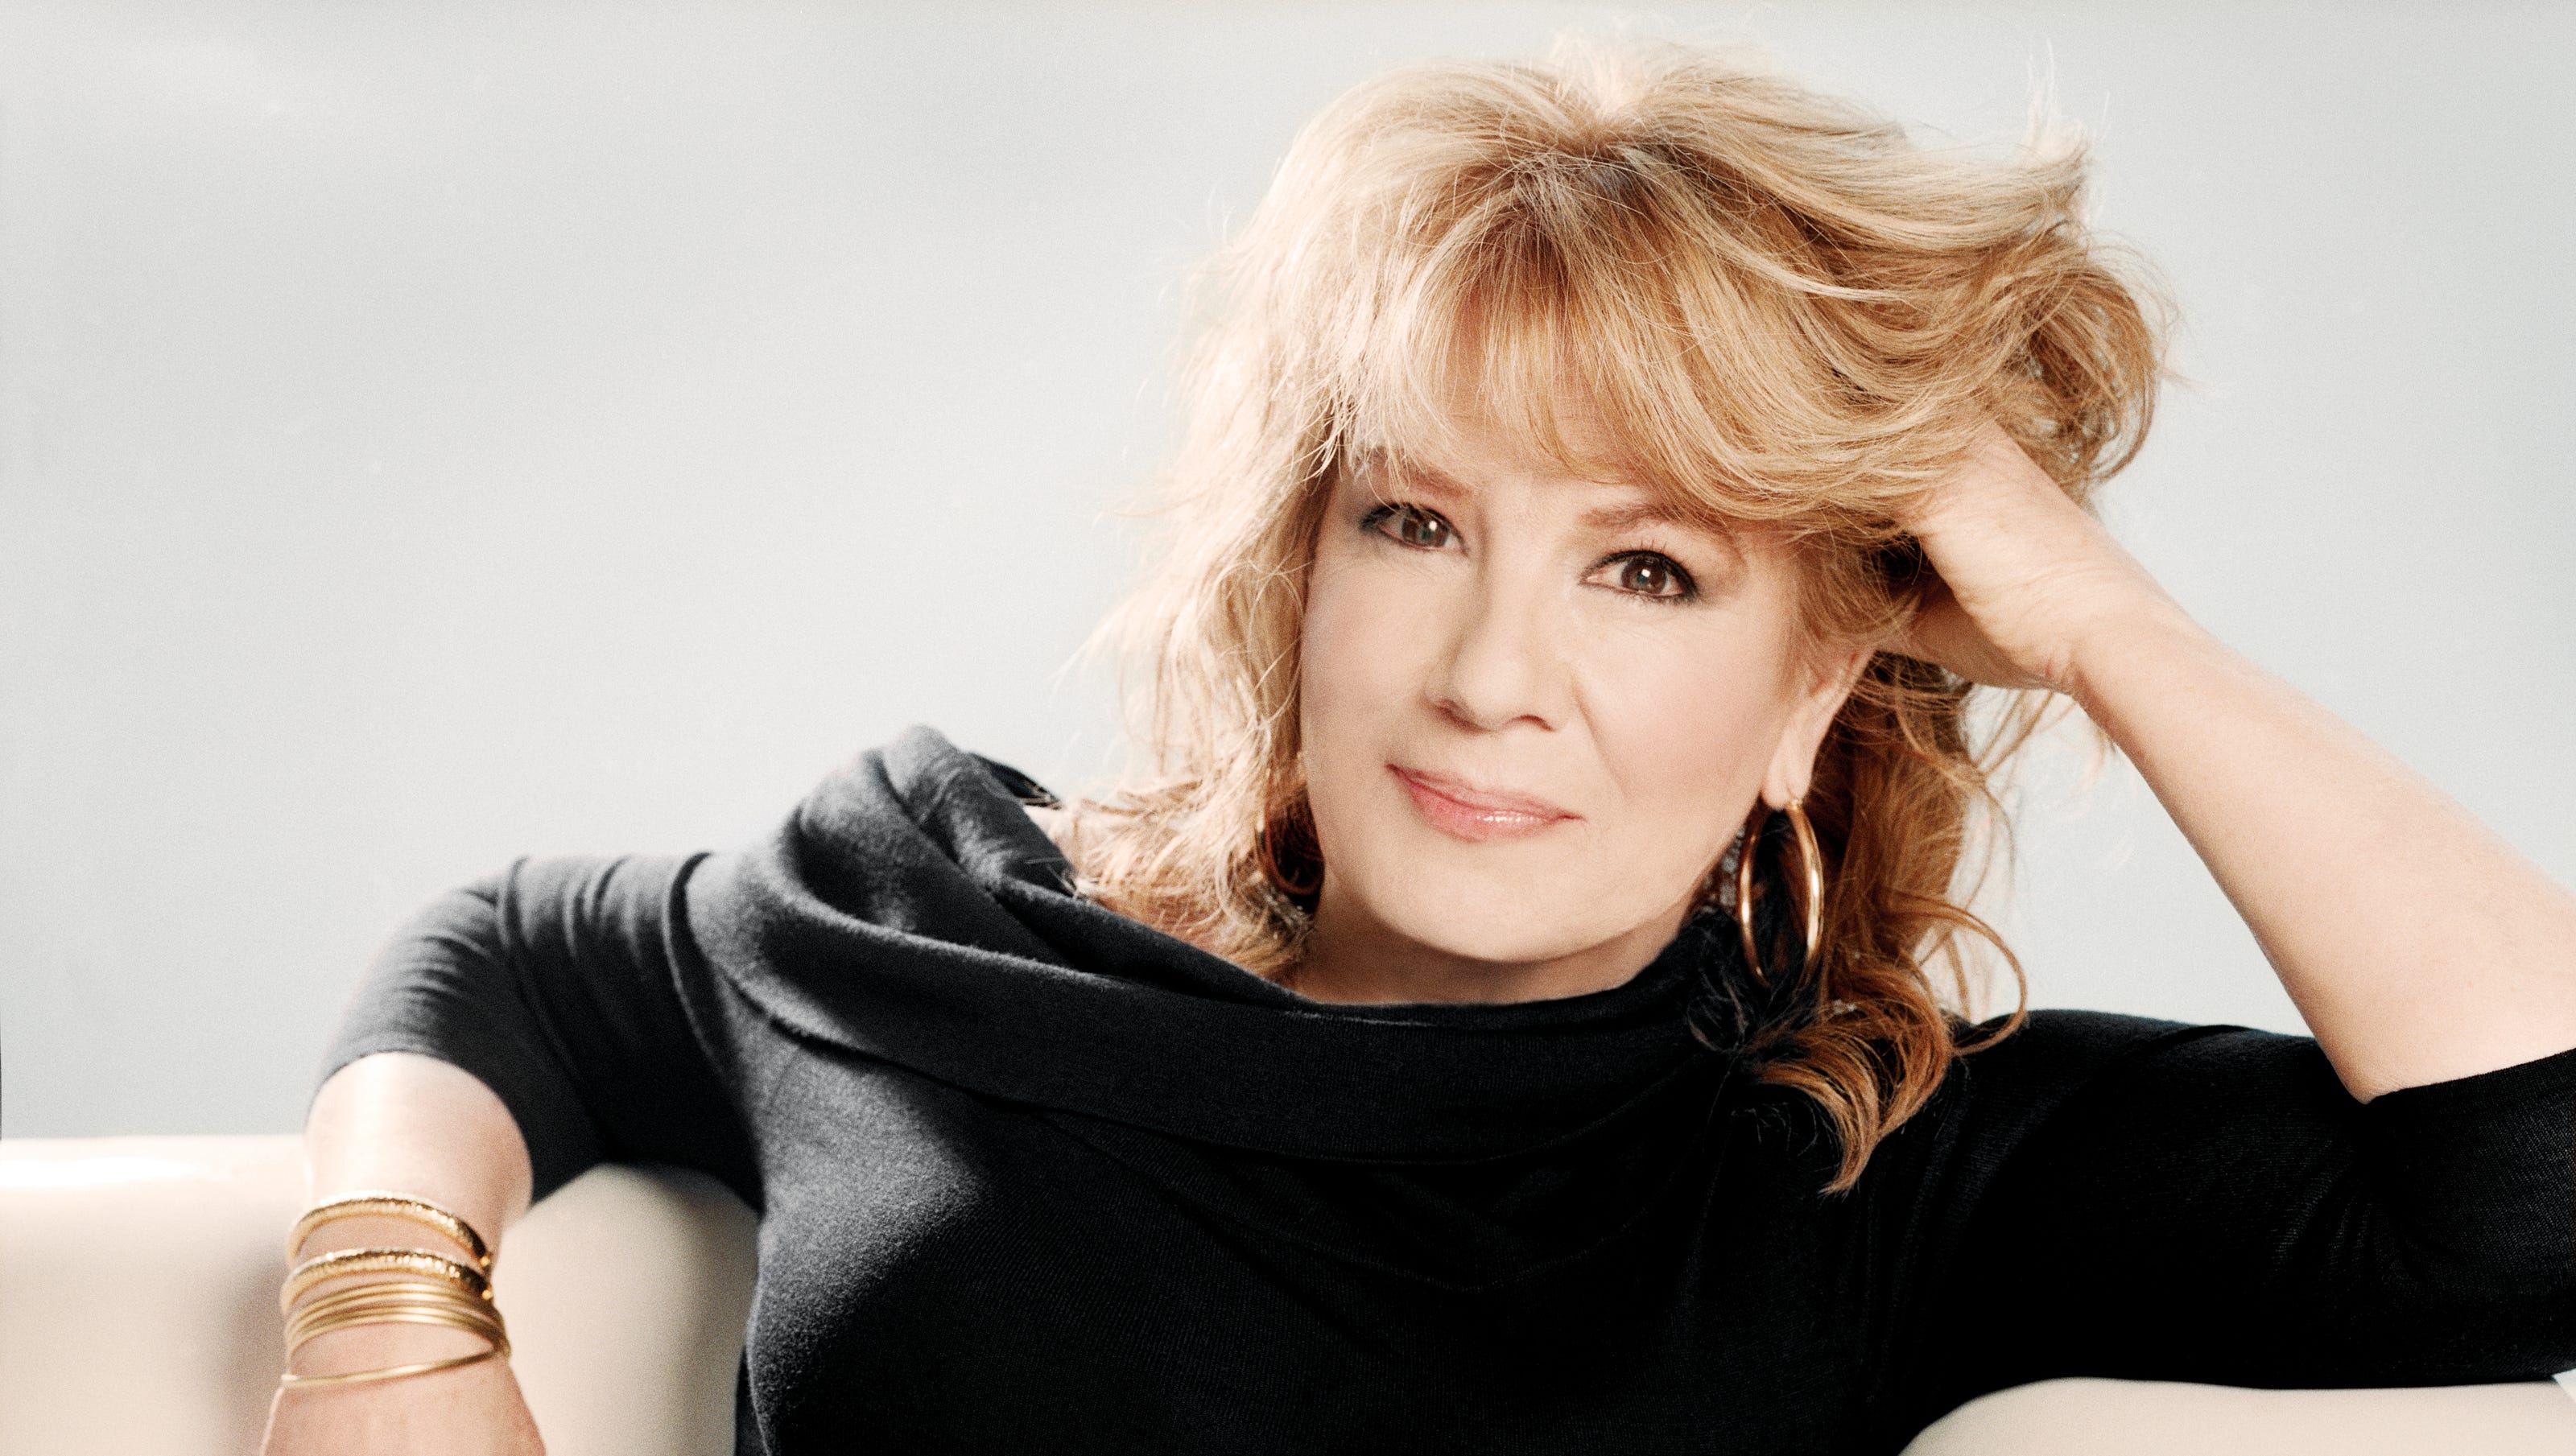 How Vikki Carr's life changed after her husband's dementia diagno...